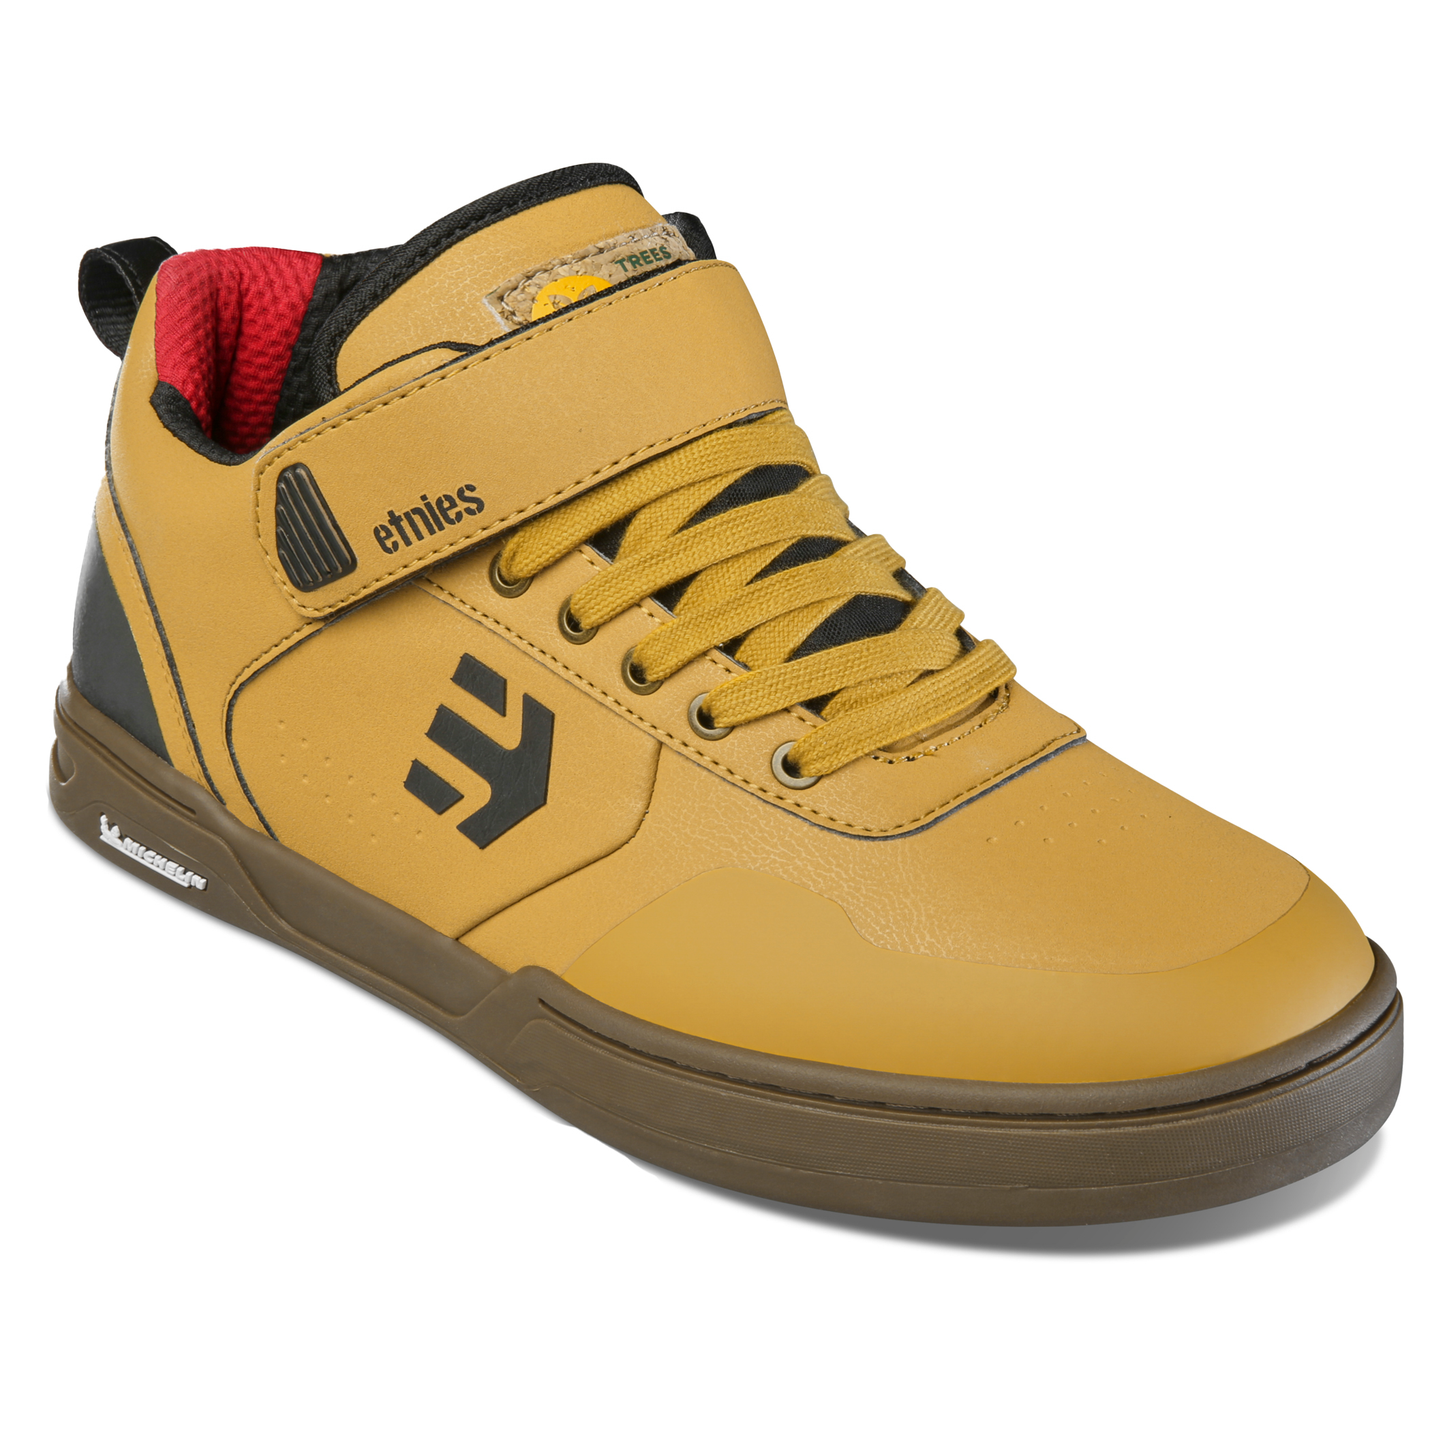 Etnies Camber Mid Michelin x TFTF Flat Shoes - US 12.0 - Tan - Gum - Image 2